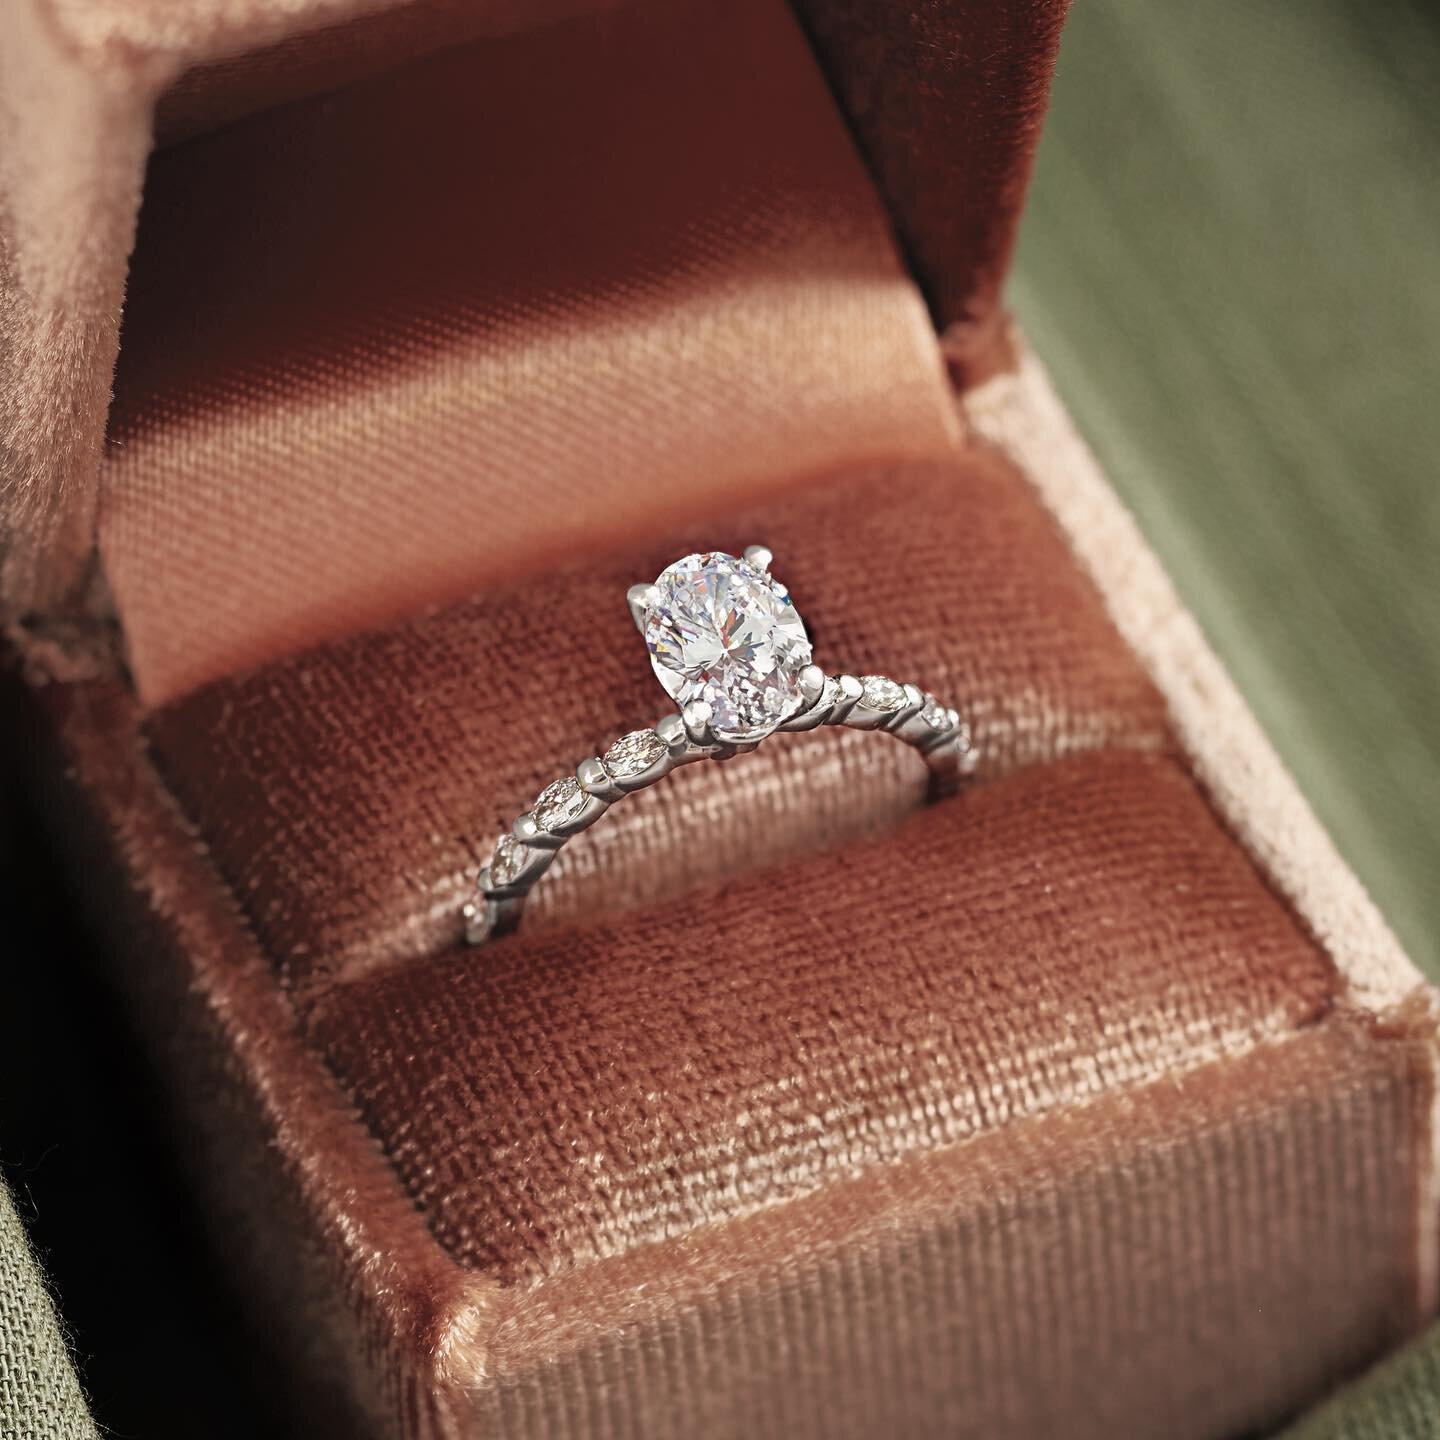 Engagement season is upon us! 💍 Take a look at how beautiful this 14K White Gold Diamond Engagement Ring turned out. Set with a 1 carat natural Oval center, accented by .25 ctw of gorgeous, east-west set, natural marquise diamonds. Classic meets mod